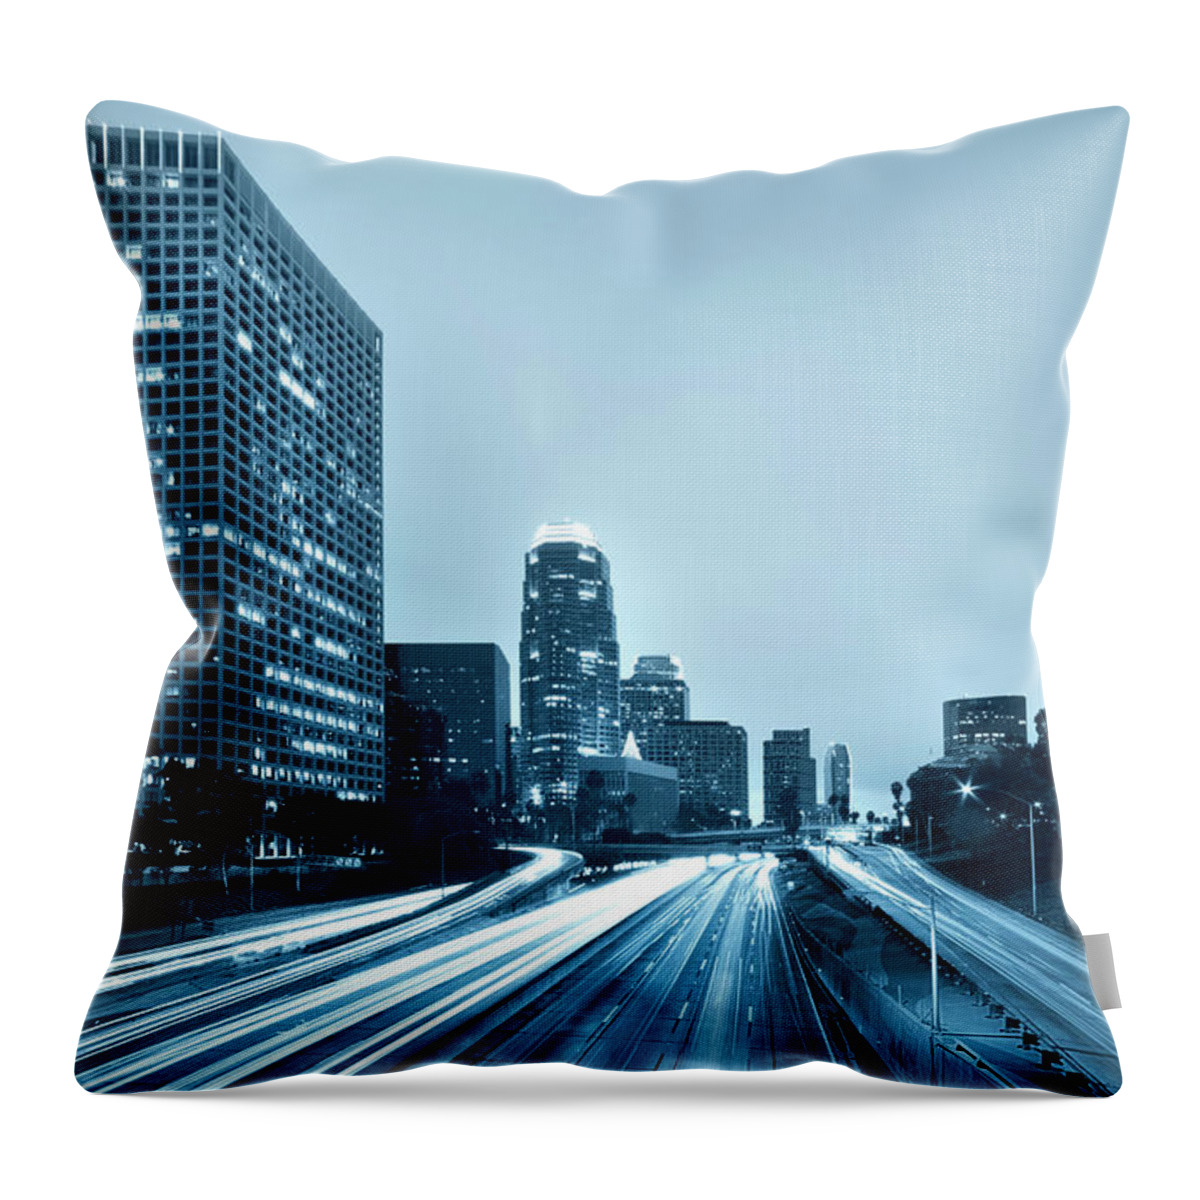 Corporate Business Throw Pillow featuring the photograph Los Angeles by Wsfurlan